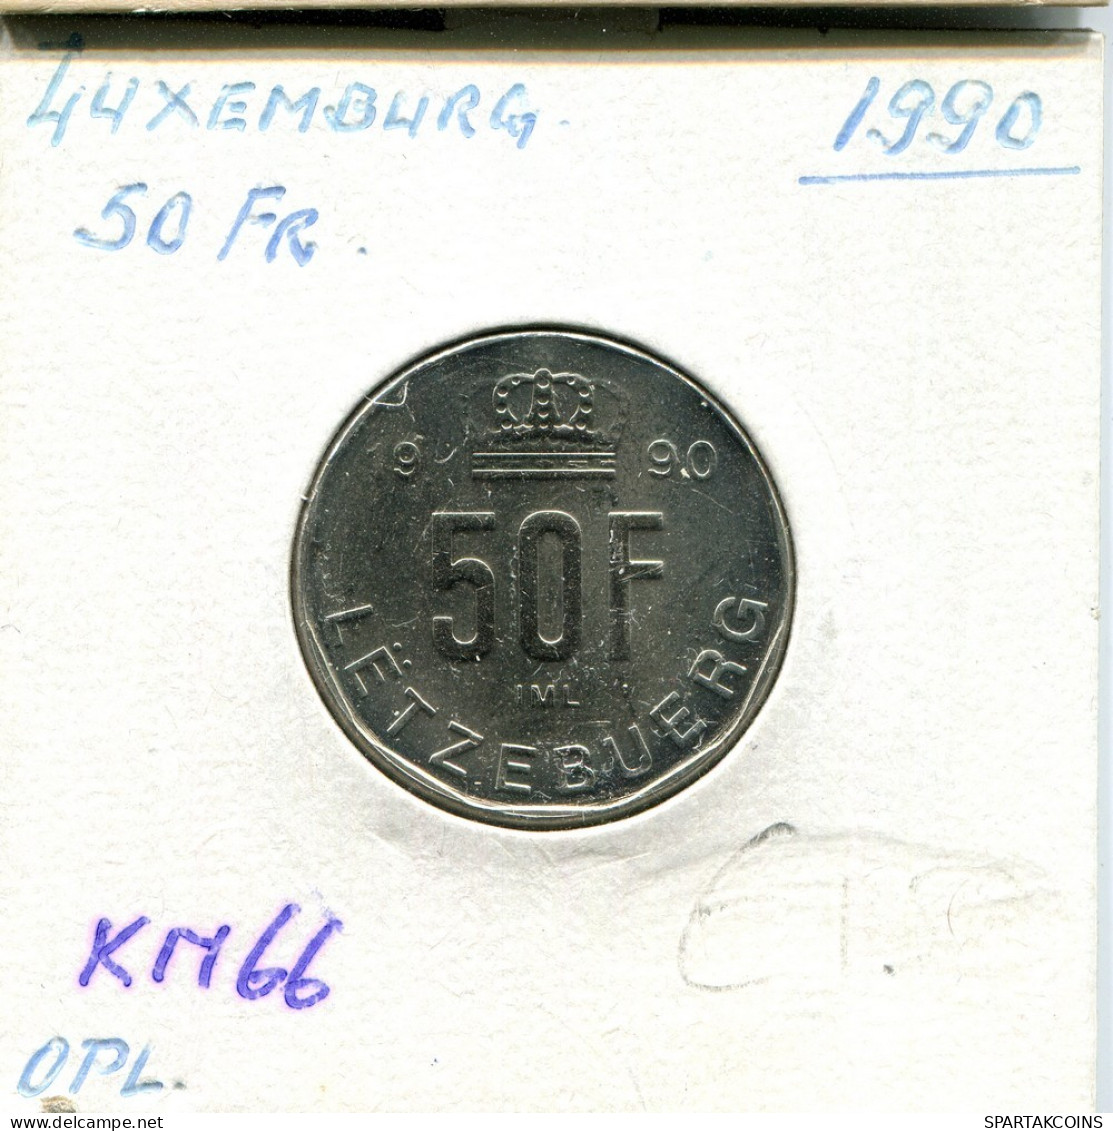 50 FRANCS 1990 LUXEMBURG LUXEMBOURG Münze #AT253.D.A - Luxemburgo